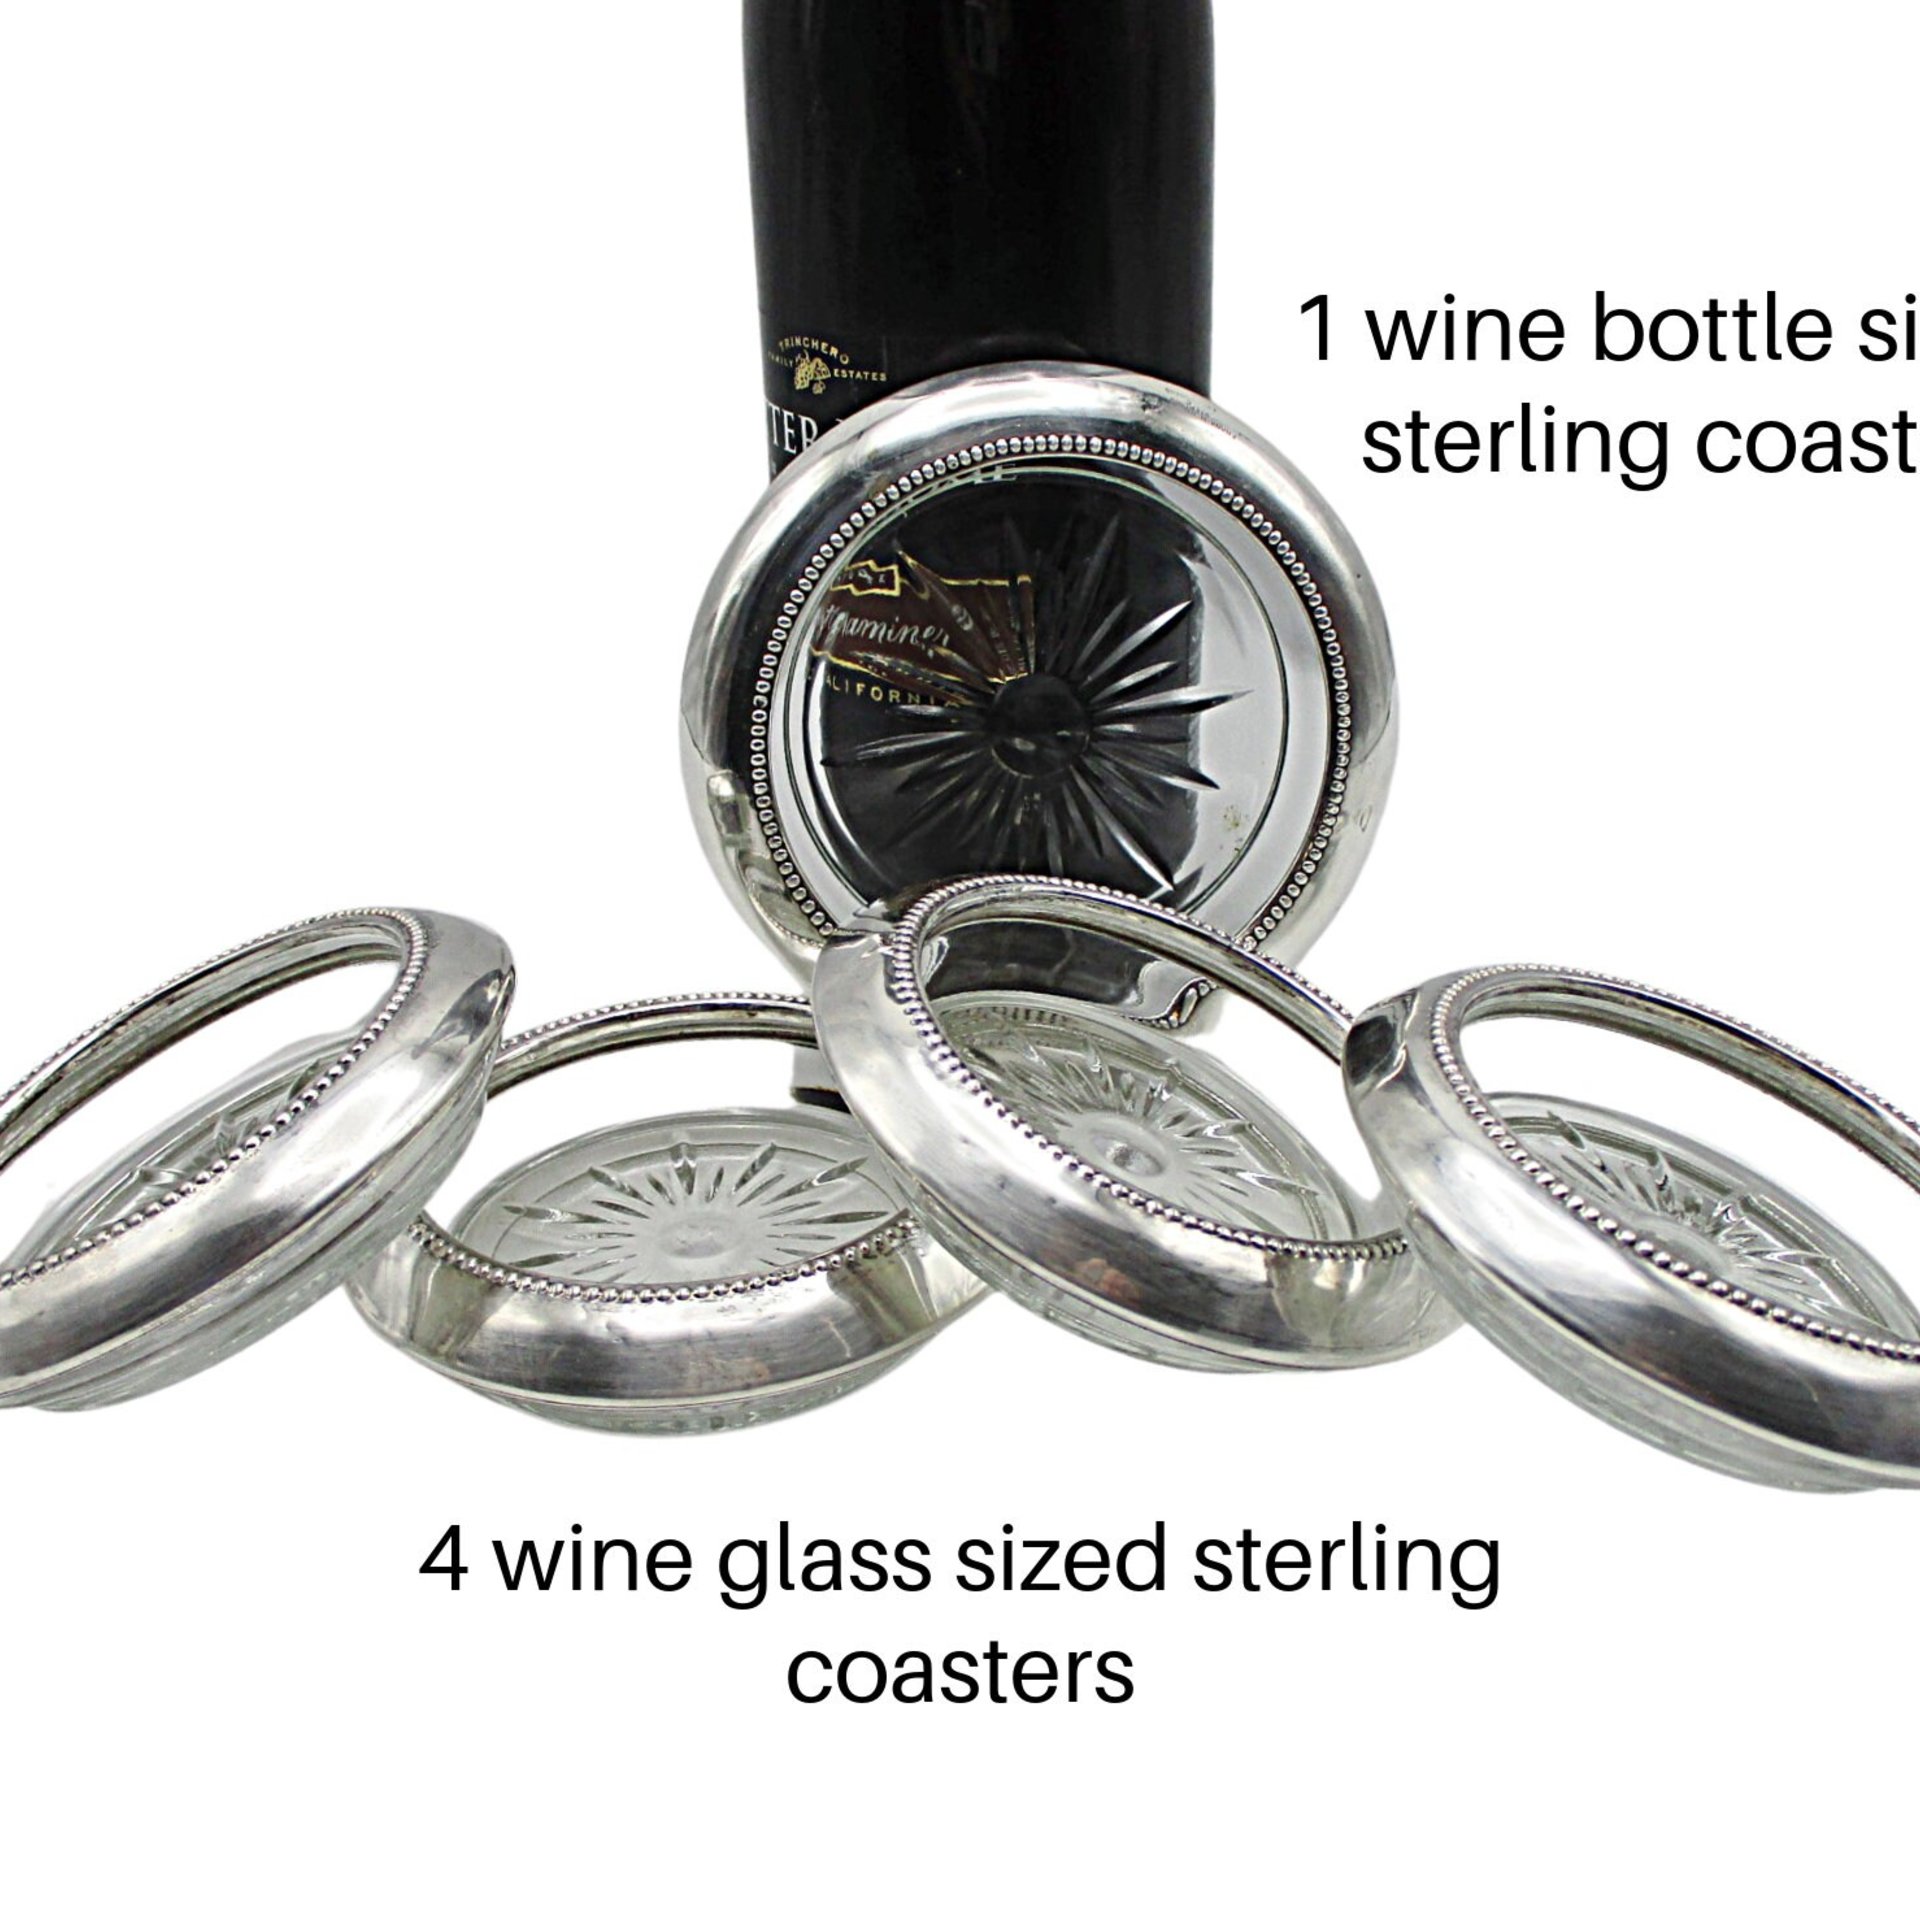 Sterling Silver Wine Bottle and Wine Glass Coaster Set, Starburst Glass, Frank Whiting, Sterling Rims, 5pc Set, Wedding Gift for Wine Lover